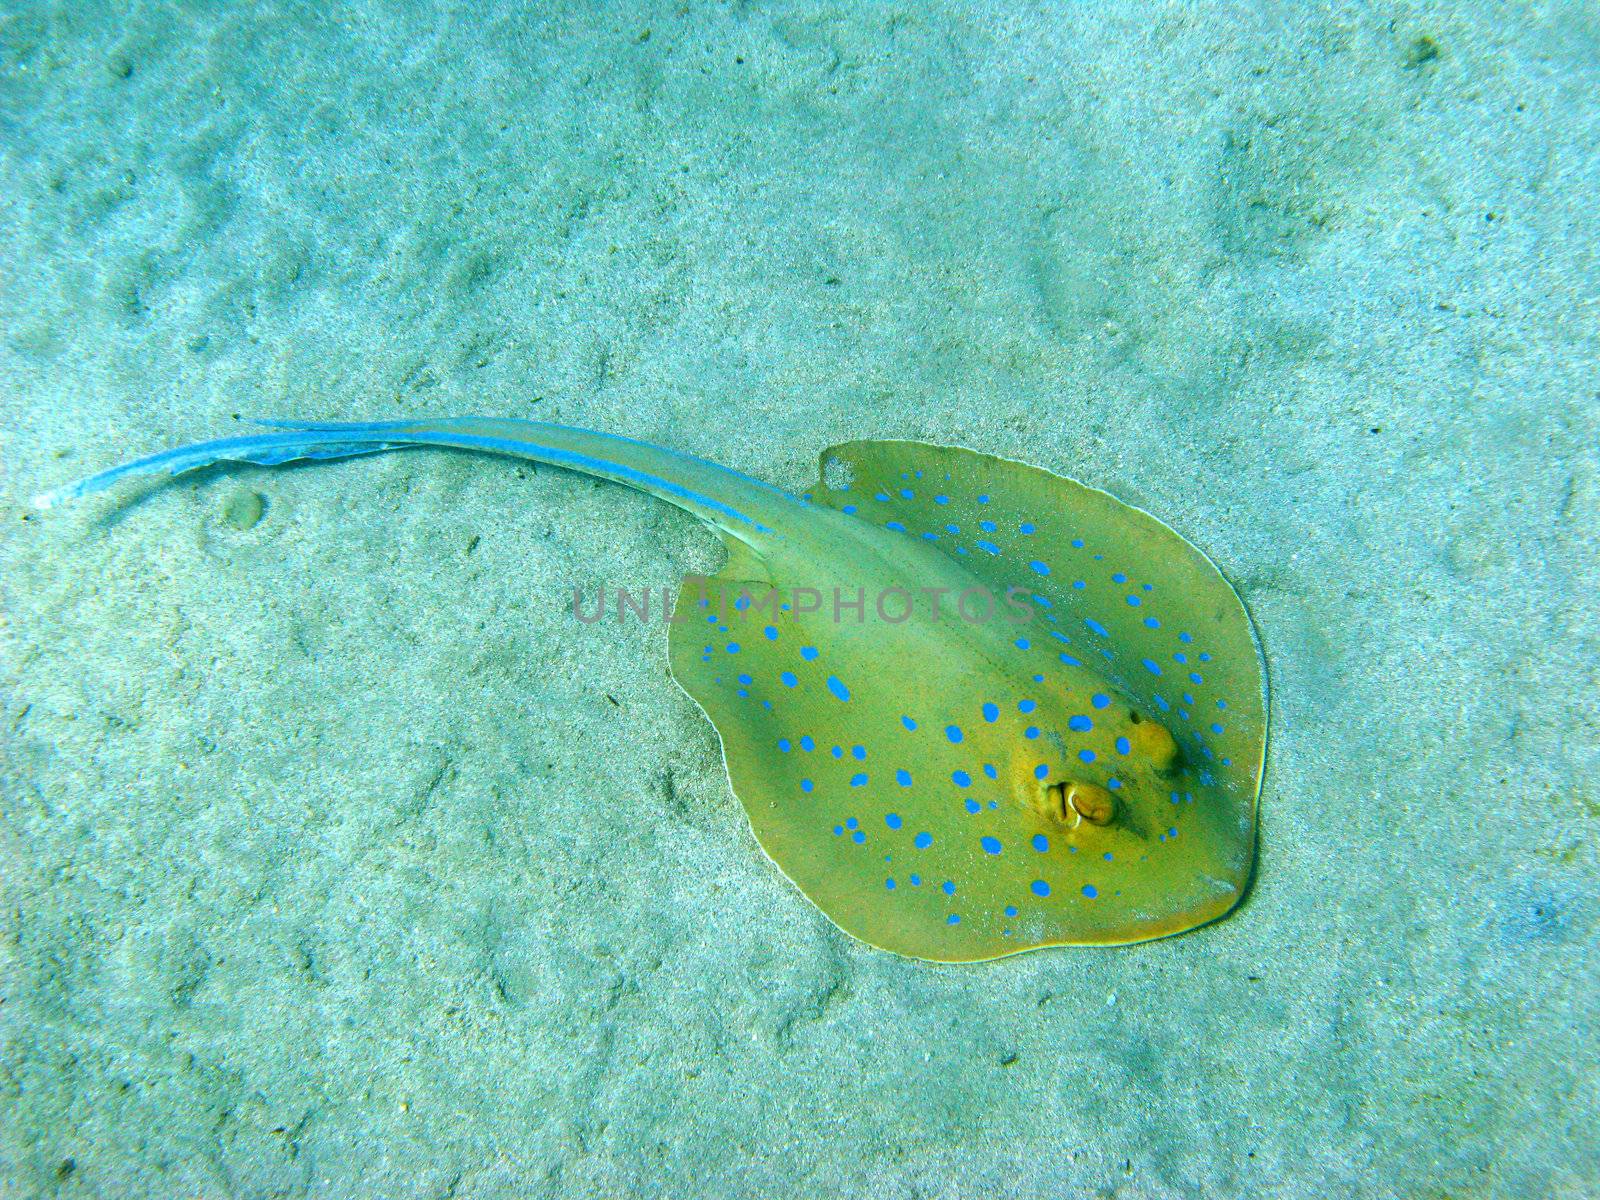 Blue-spotted stingray by vintrom